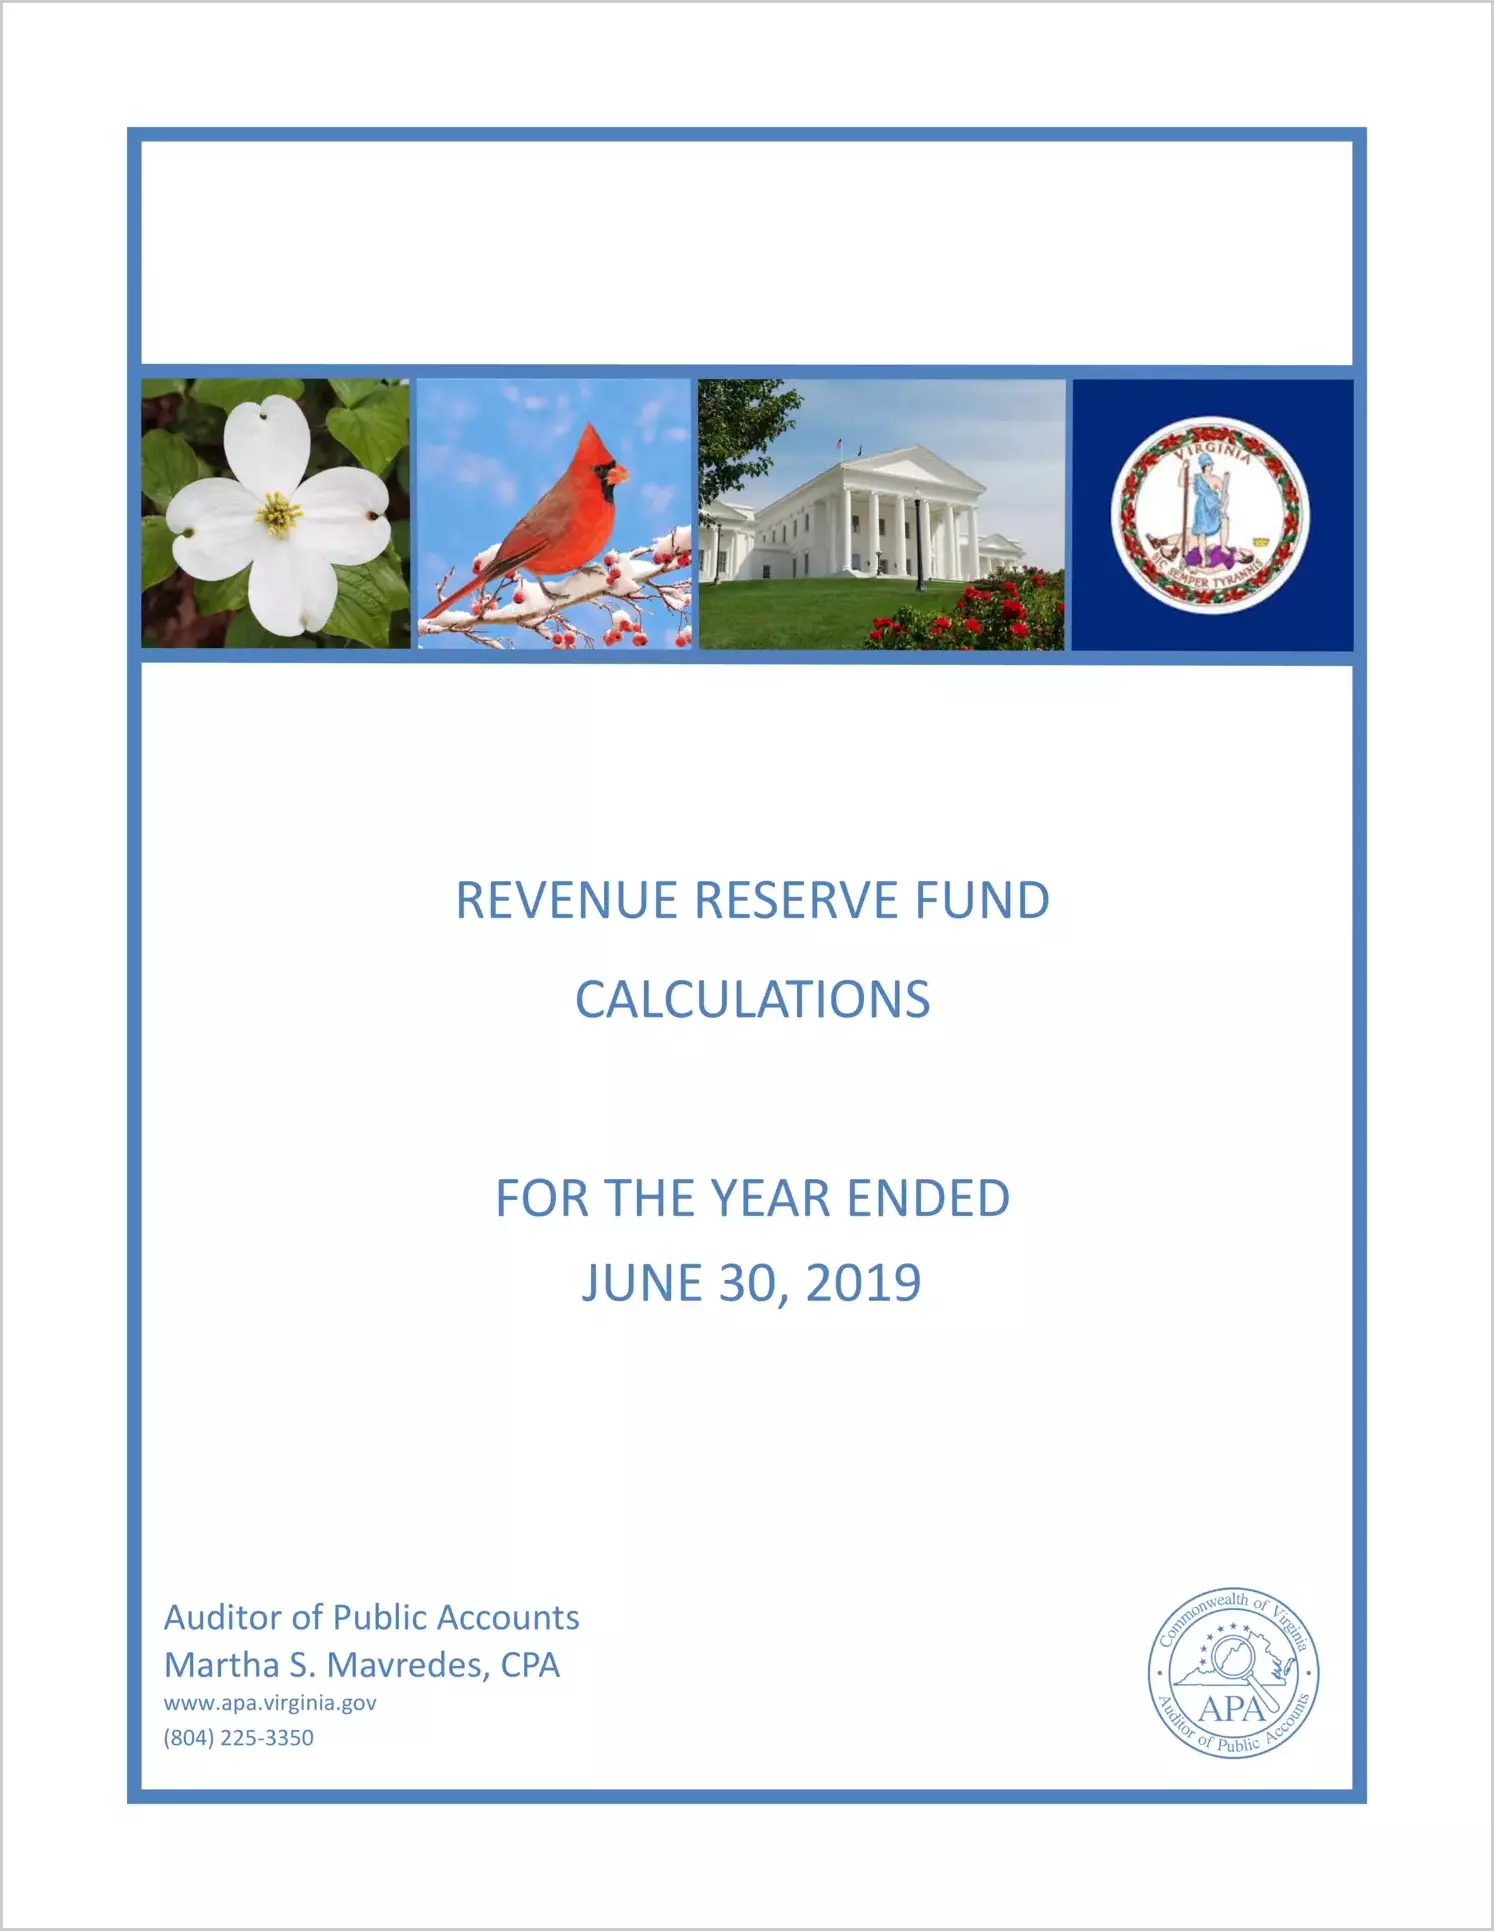 Revenue Reserve Fund Calculations for the year ended June 30, 2019